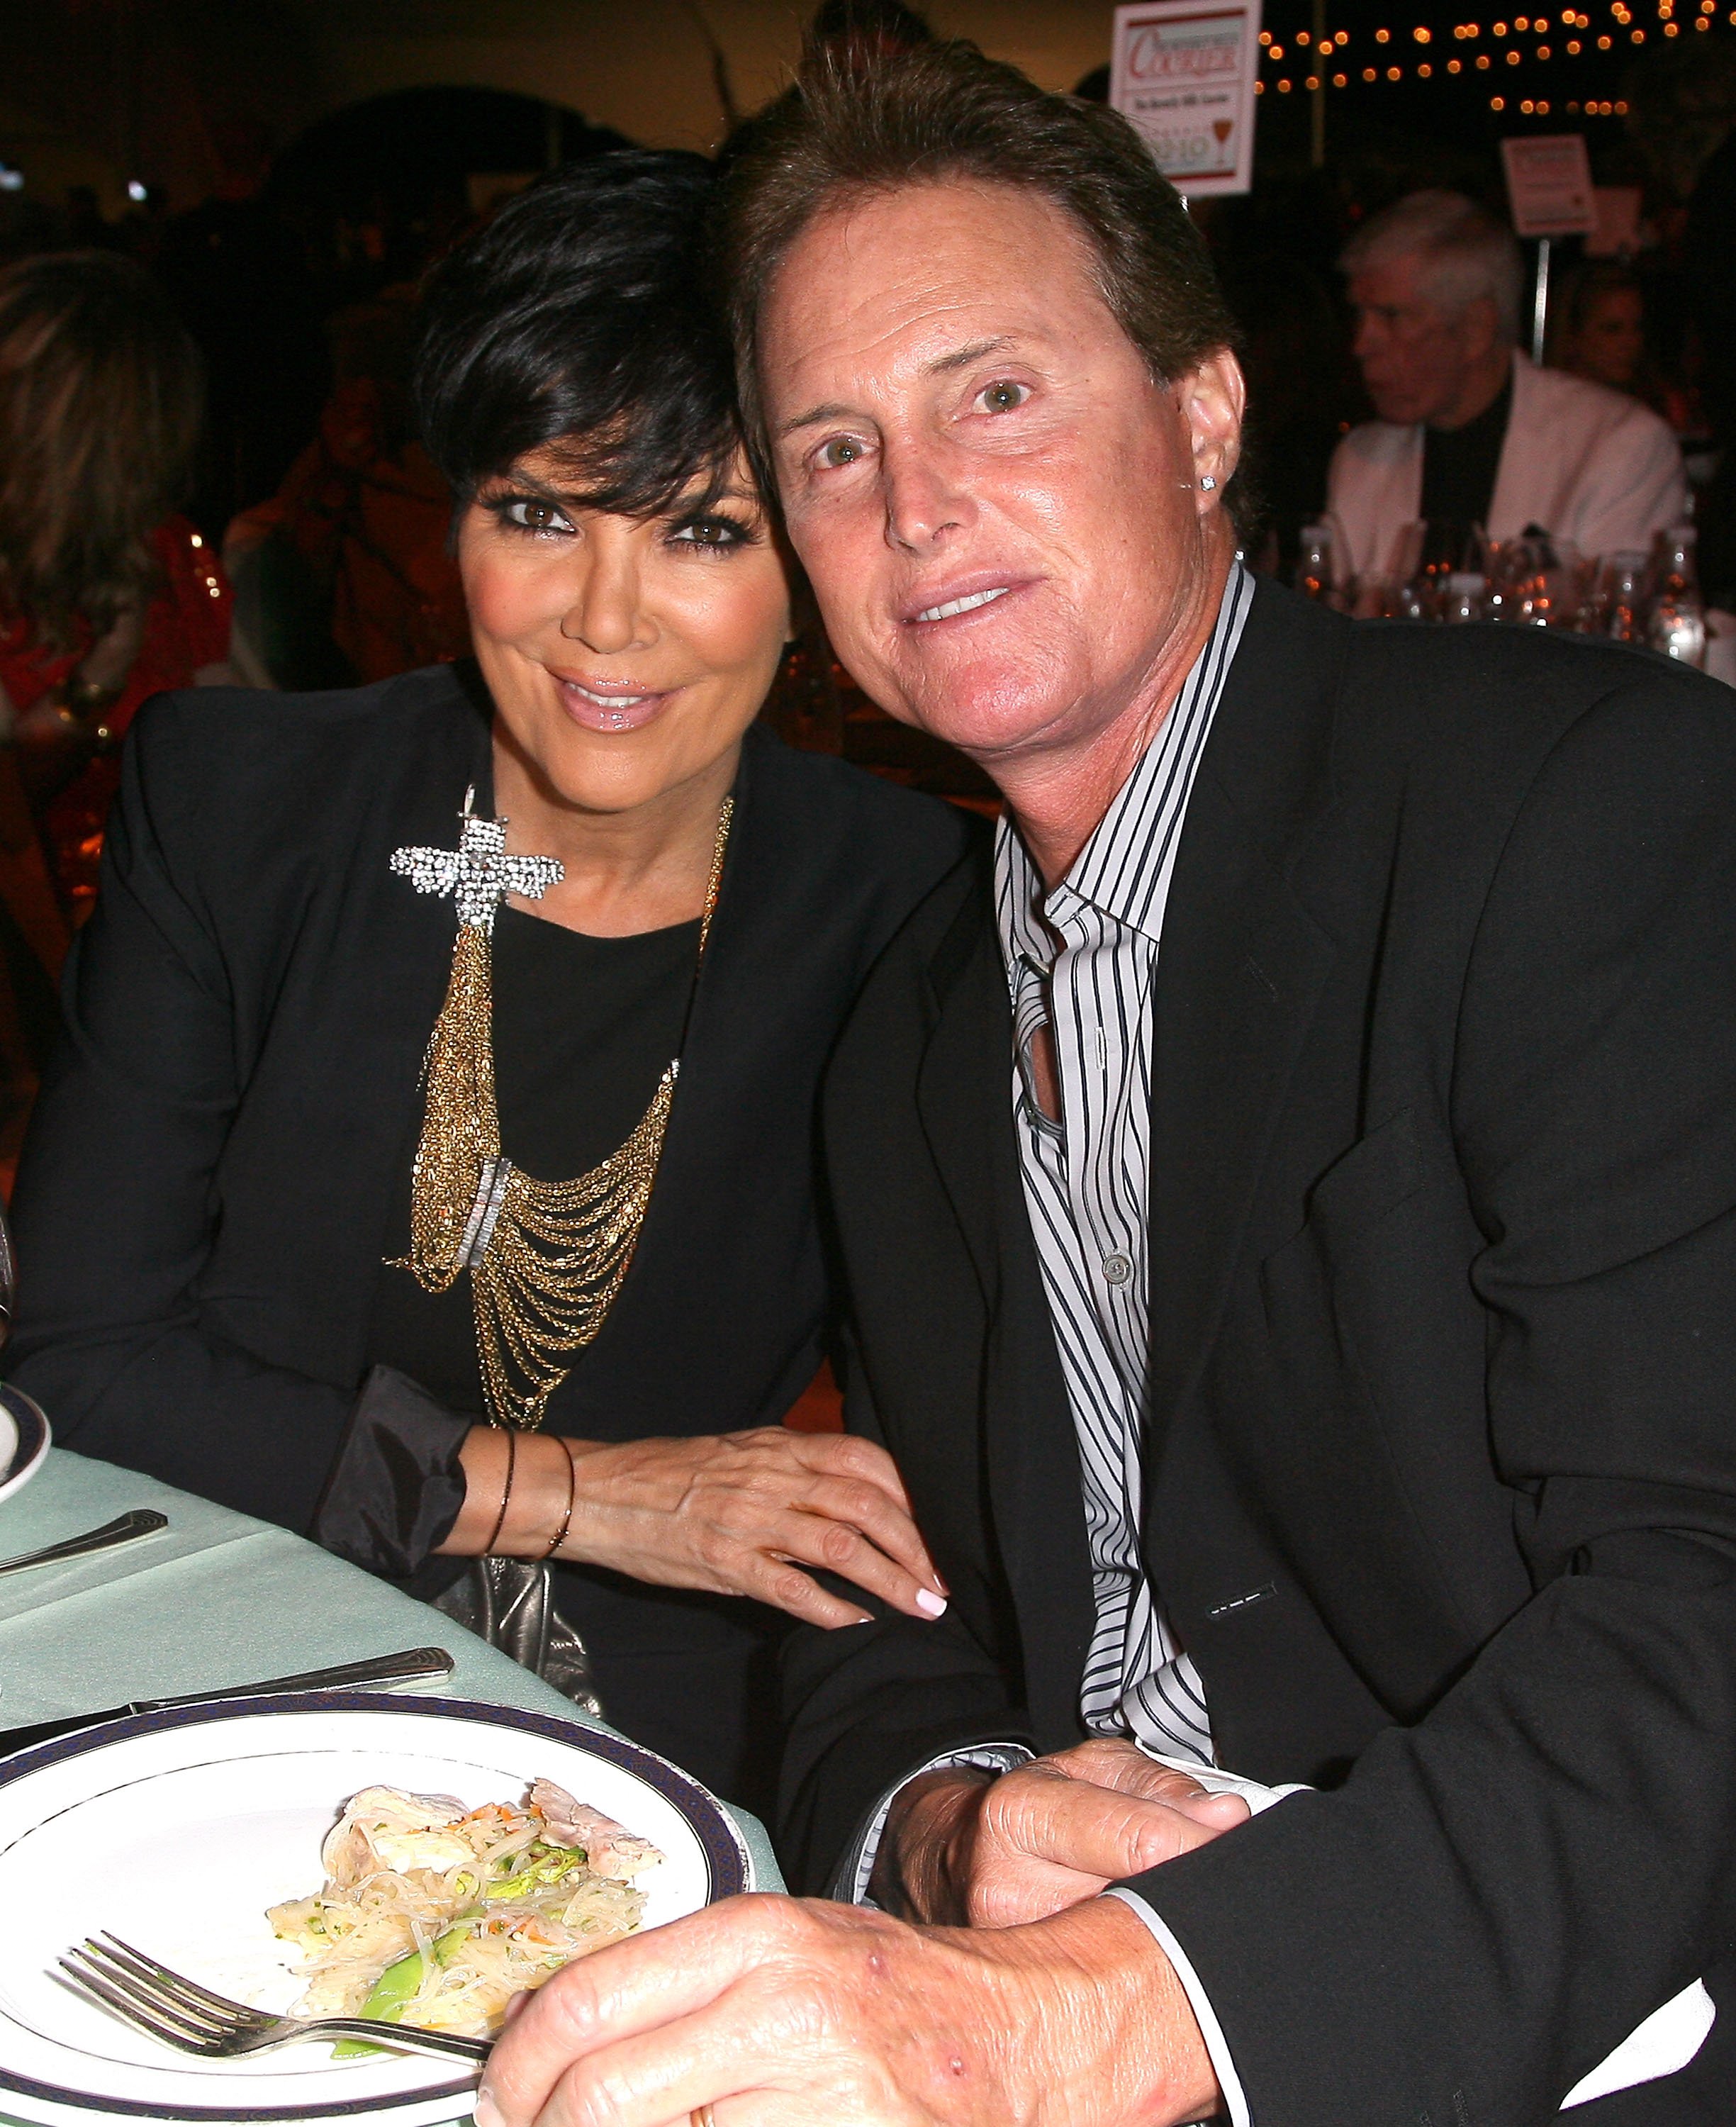 Kris Jenner and Bruce Jenner attend the Taste Of Beverly Hills Wine & Food Festival Opening Night on September 2, 2010, in Beverly Hills, California. | Source: Getty Images.